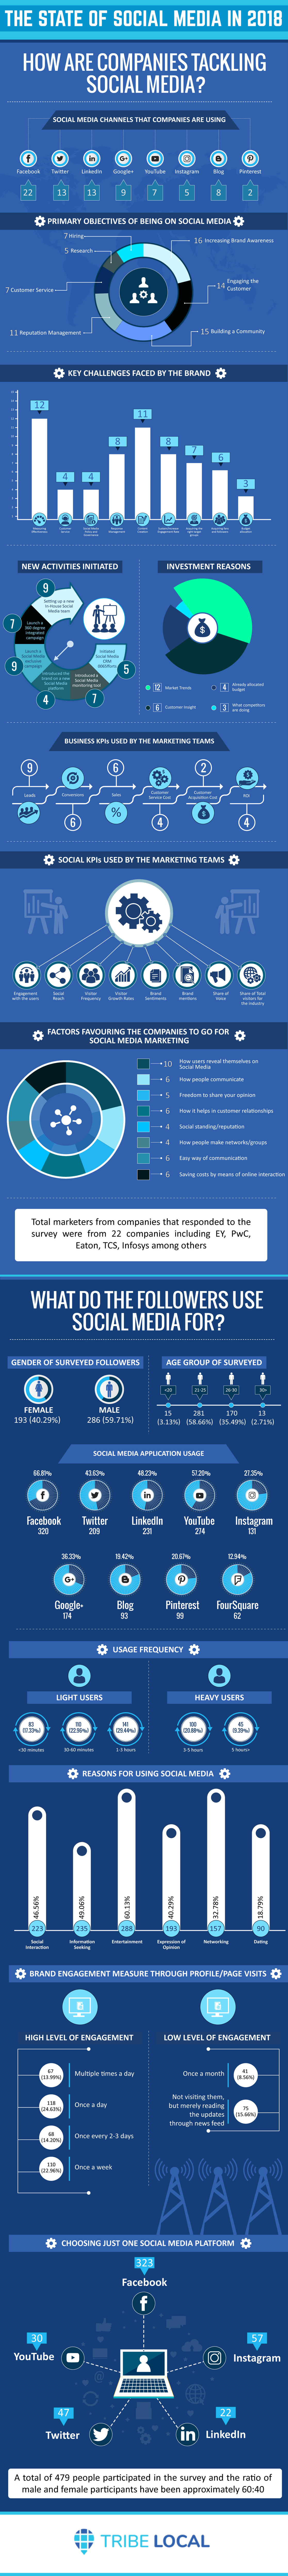 Business and Consumer Survey: The State of Social Media 2018 - #infographic